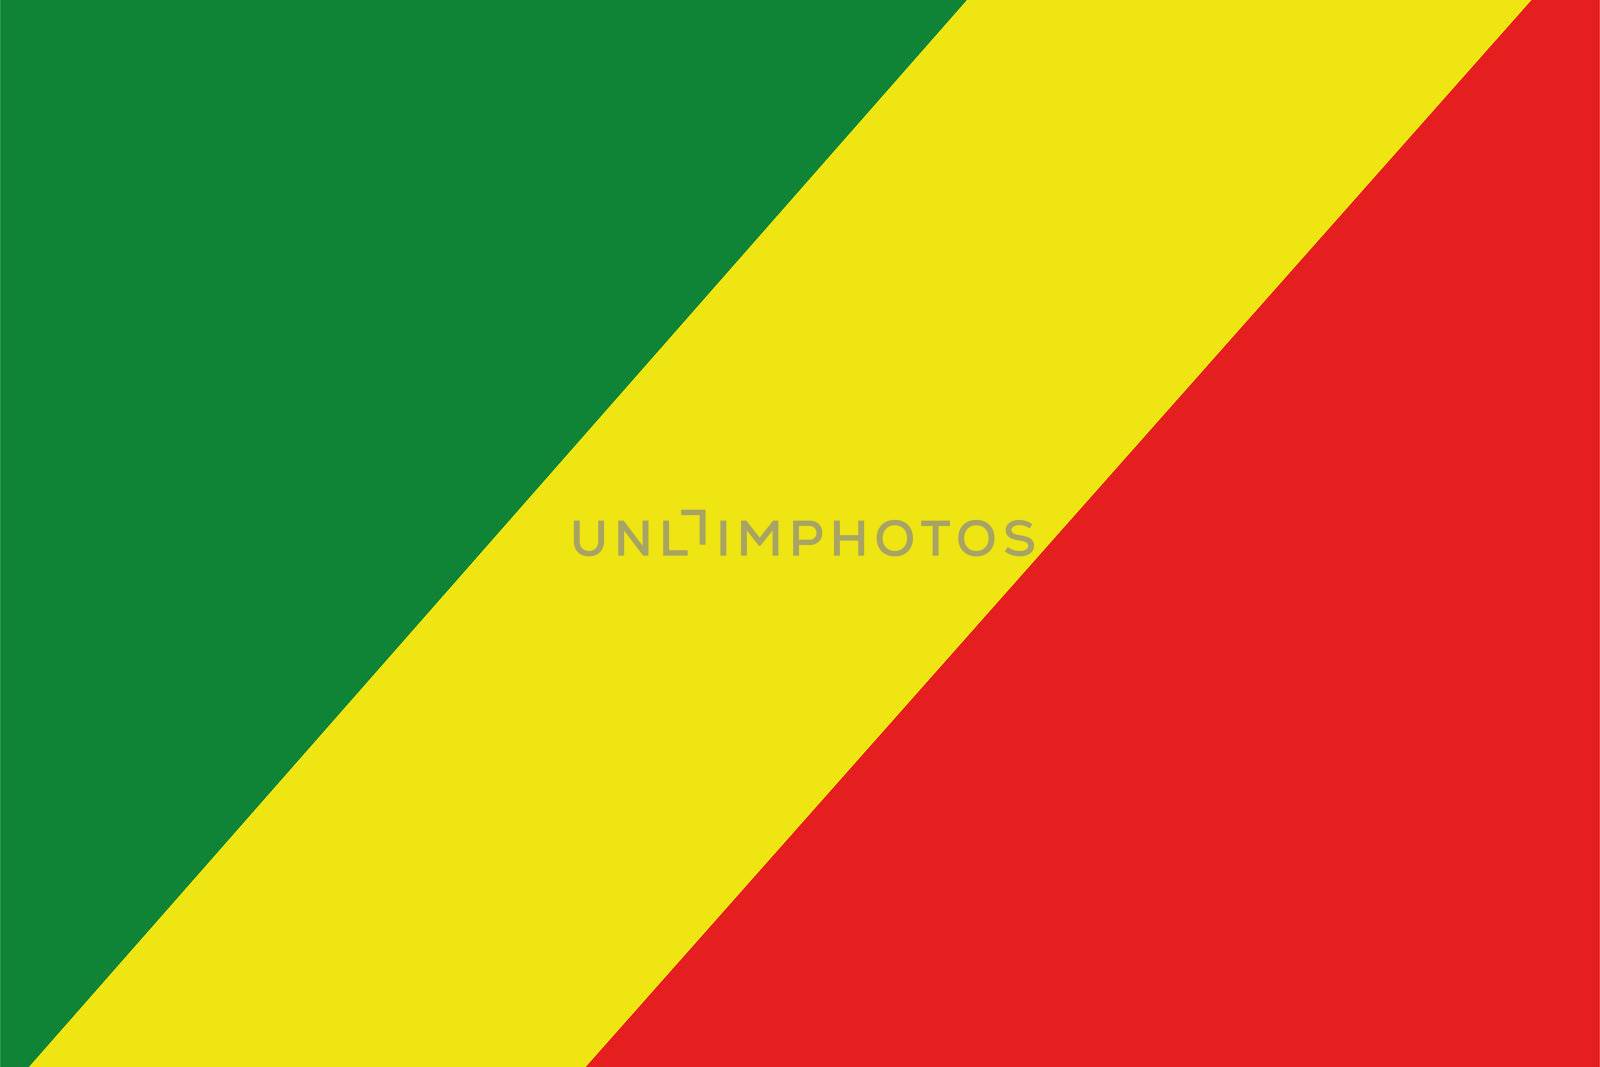 An illustration of the flag of Congo